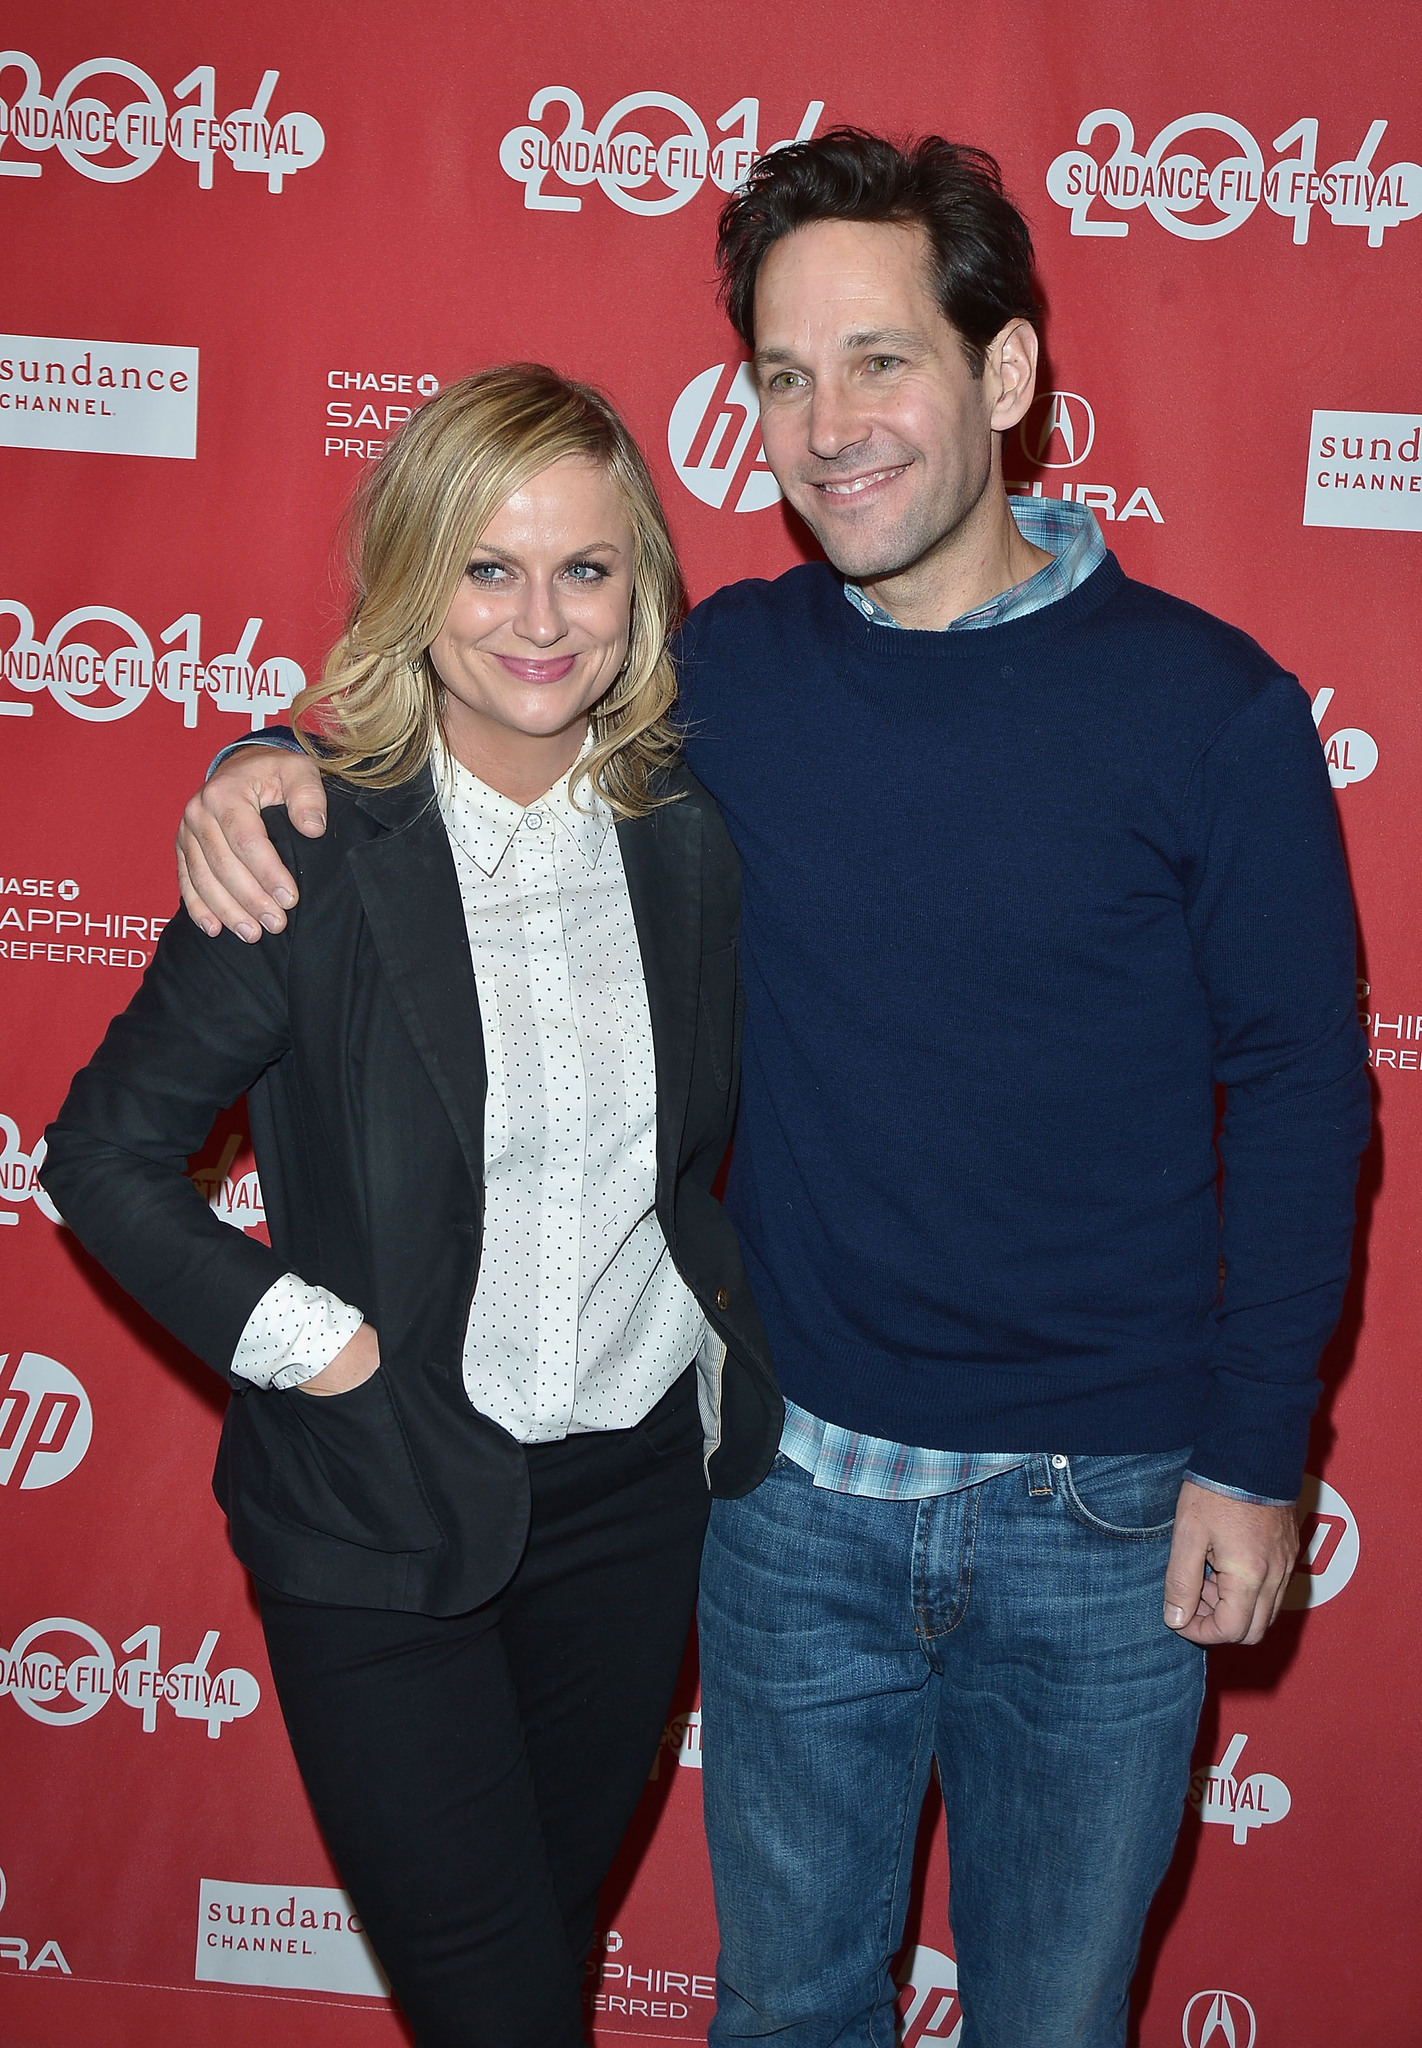 Amy Poehler and Paul Rudd at event of They Came Together (2014)